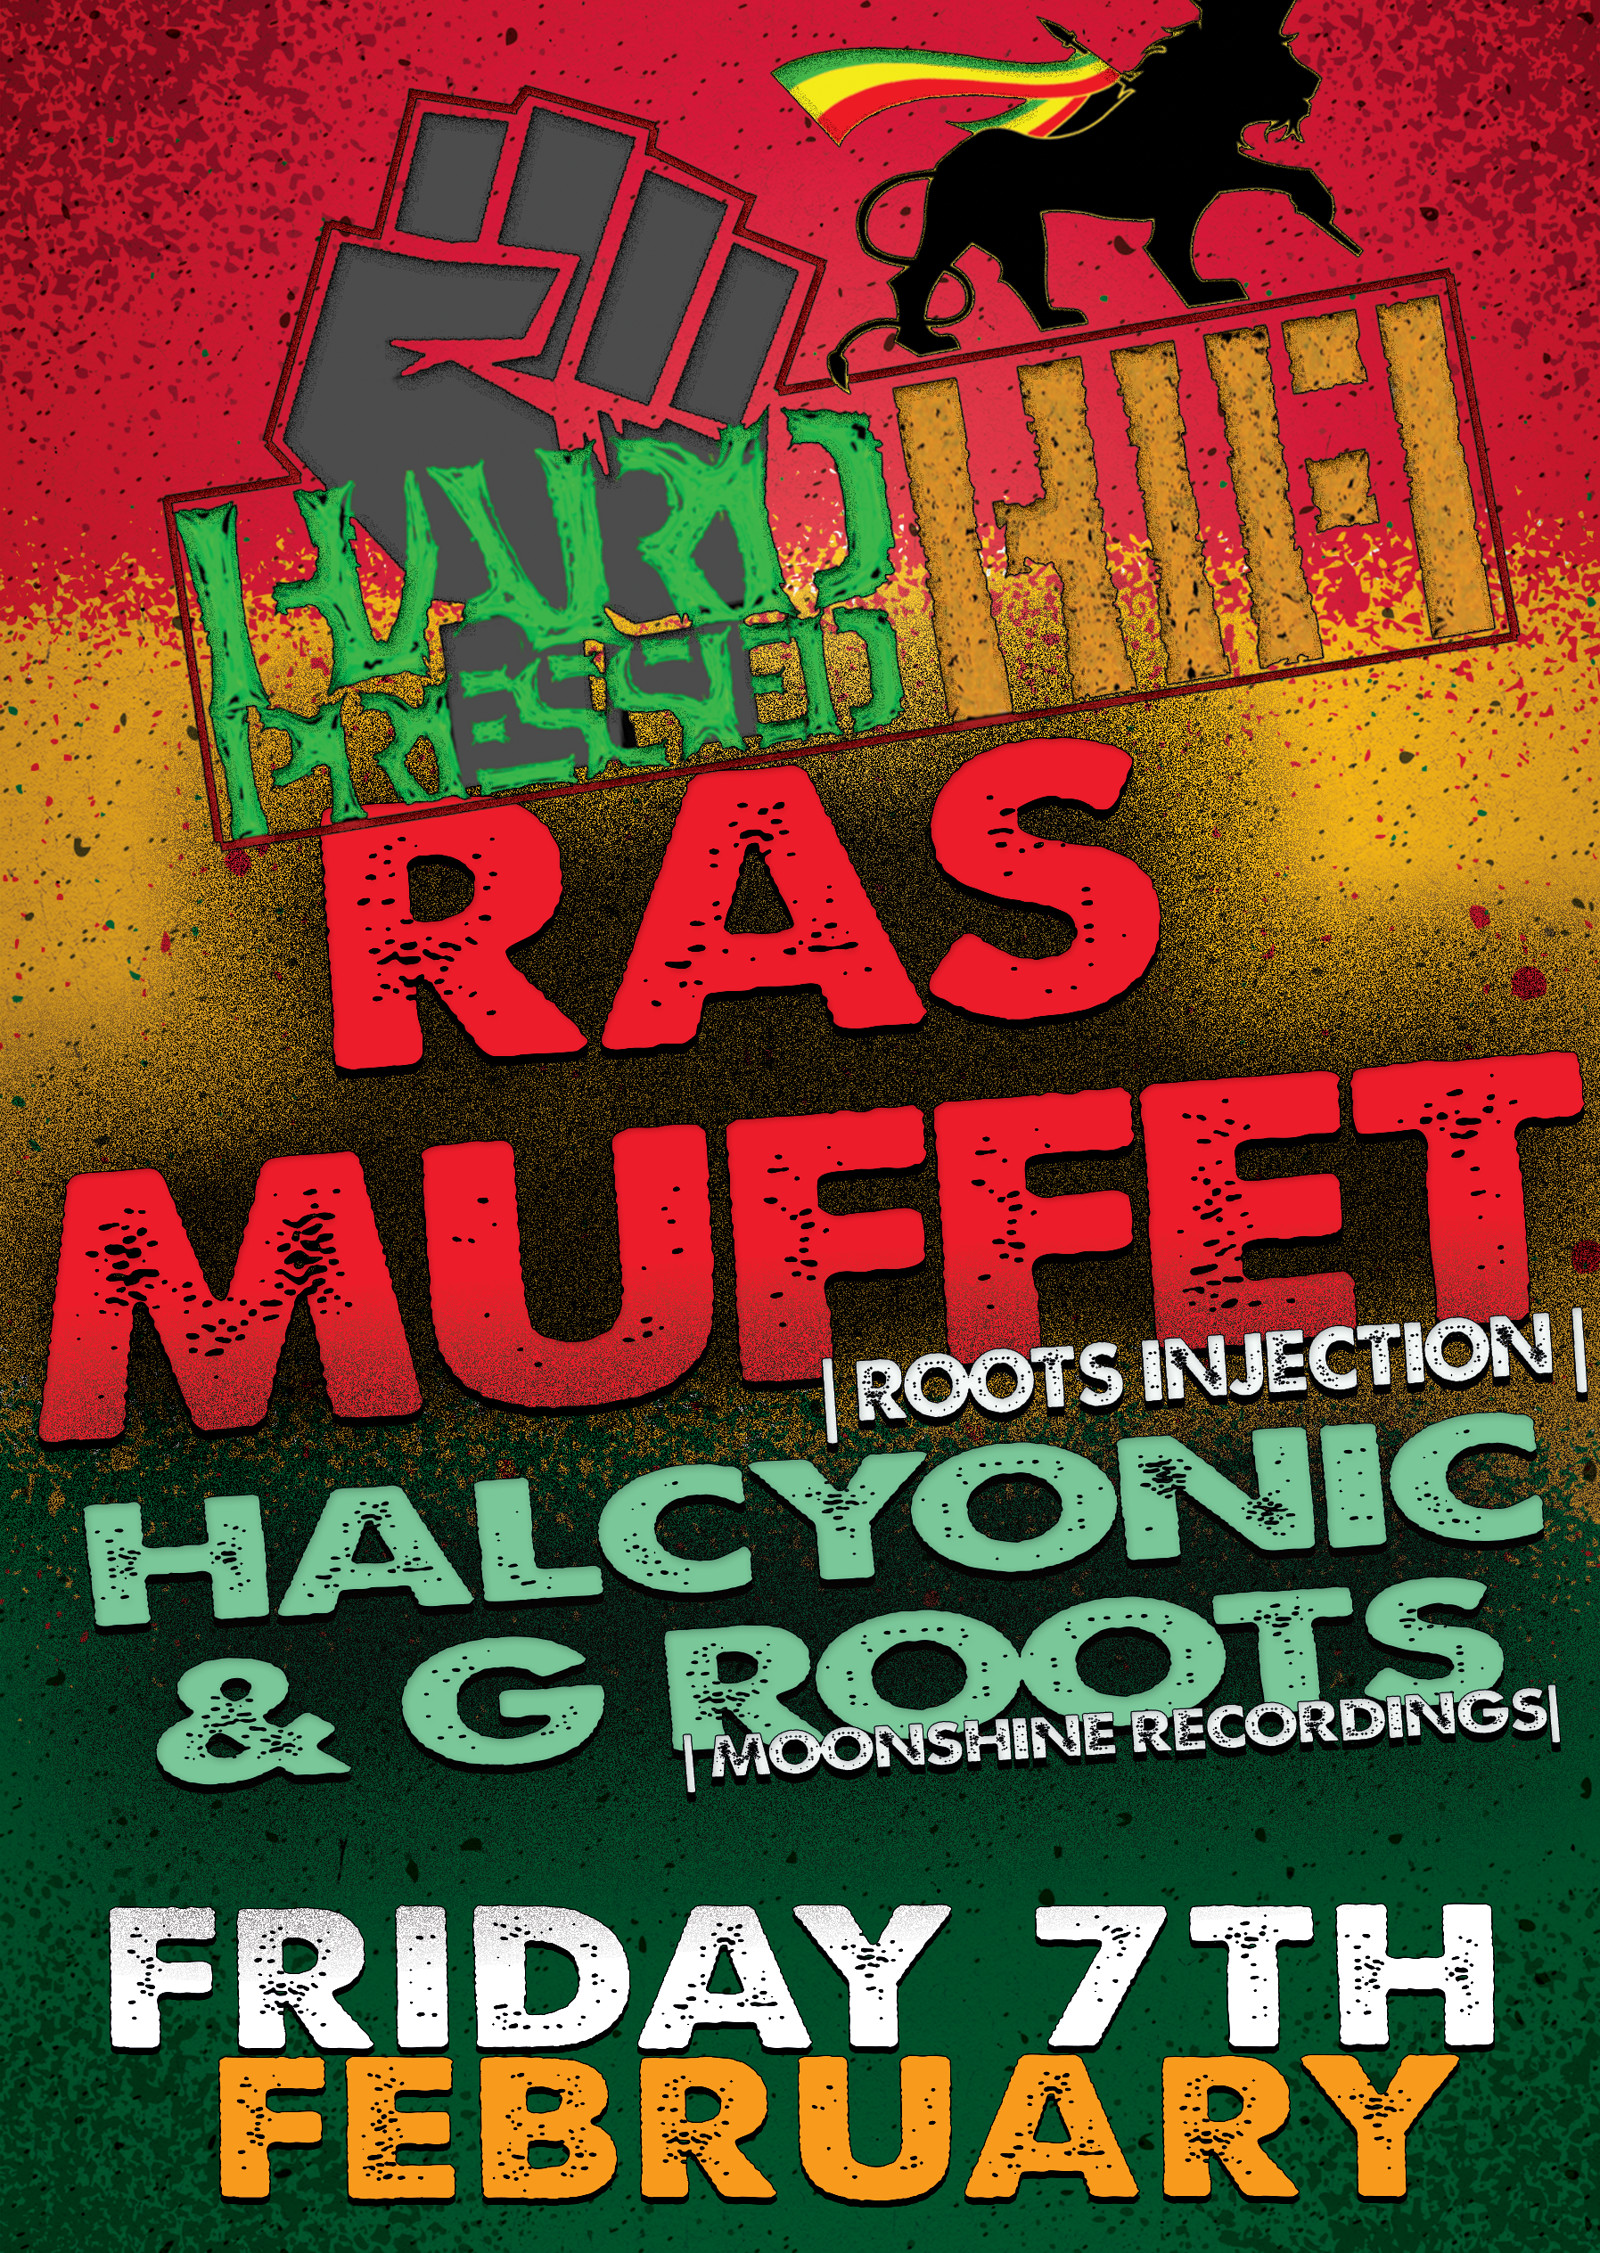 Hard Pressed Hifi - Ras Muffet Halcyonic & G Roots at Cosies